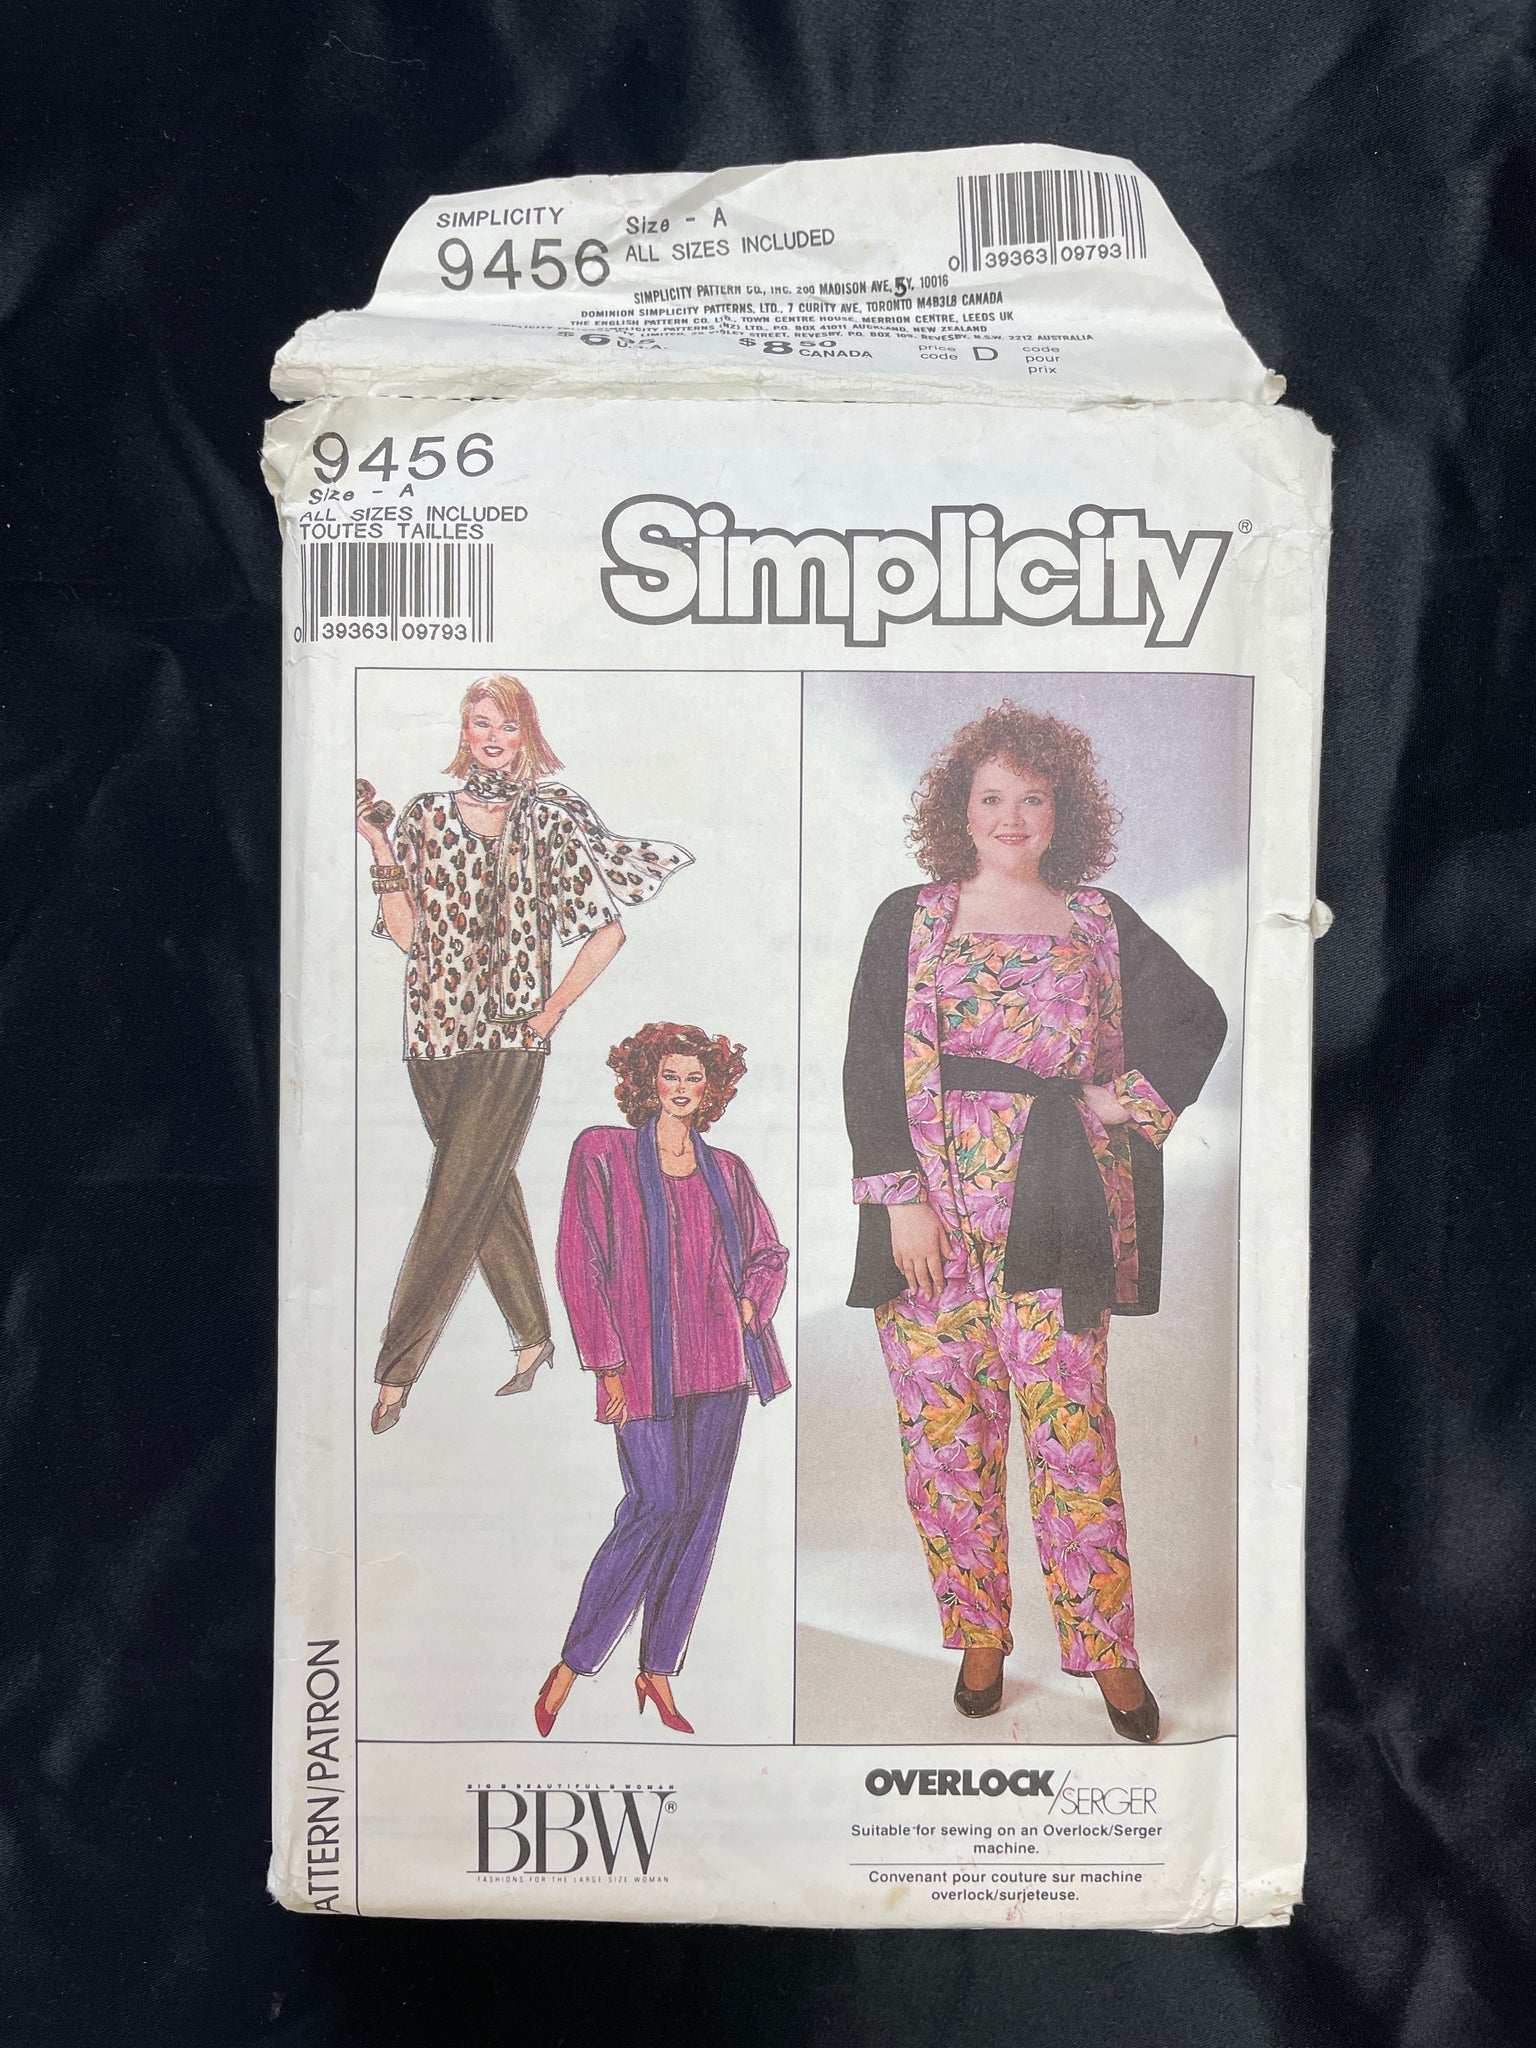 1989 Simplicity 9456 Pattern - Jacket, Tops, Pants and Scarf FACTORY FOLDED